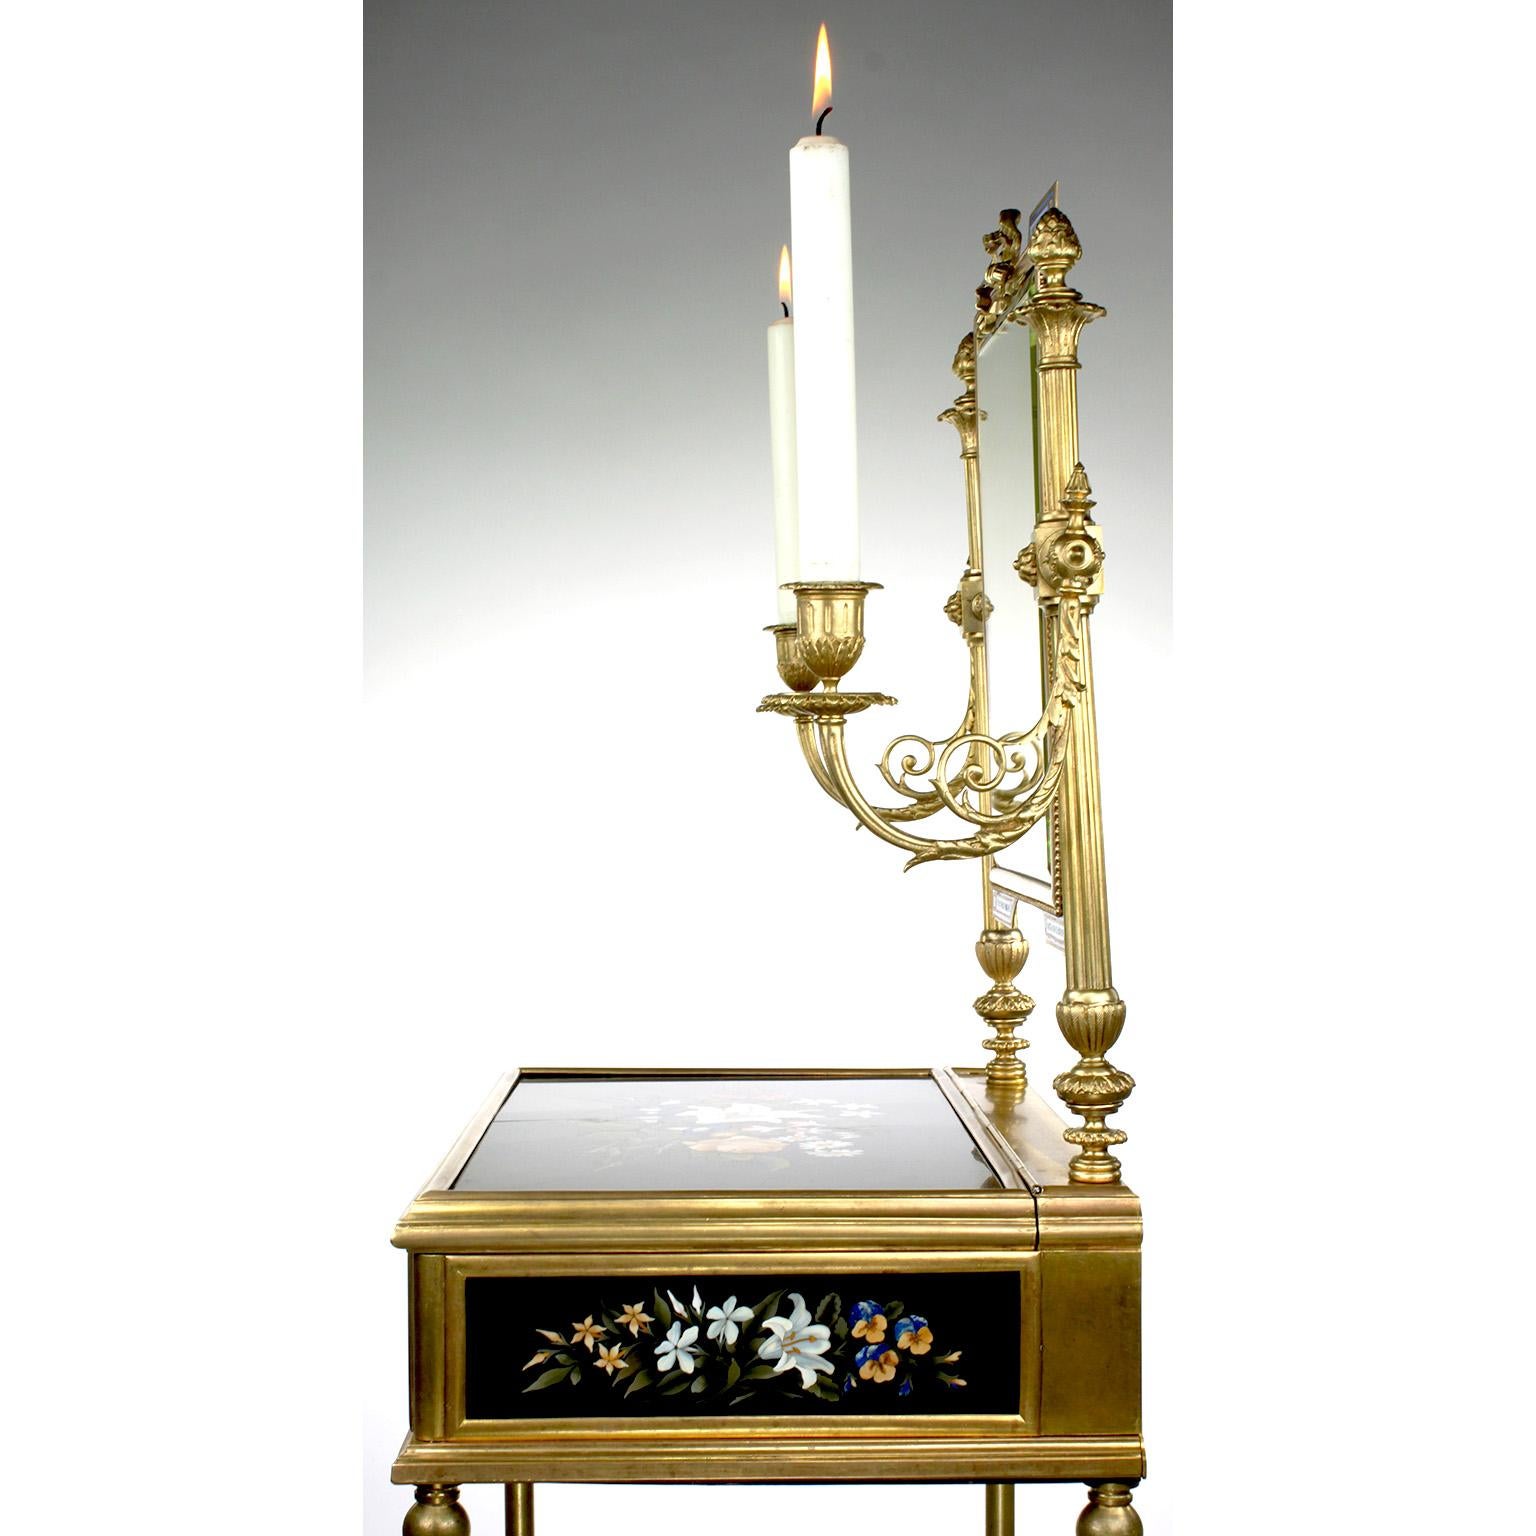 French 19th Century Gilt-Bronze and Pietra Dura Vanity Stand, Attr. Tahan, Paris For Sale 11